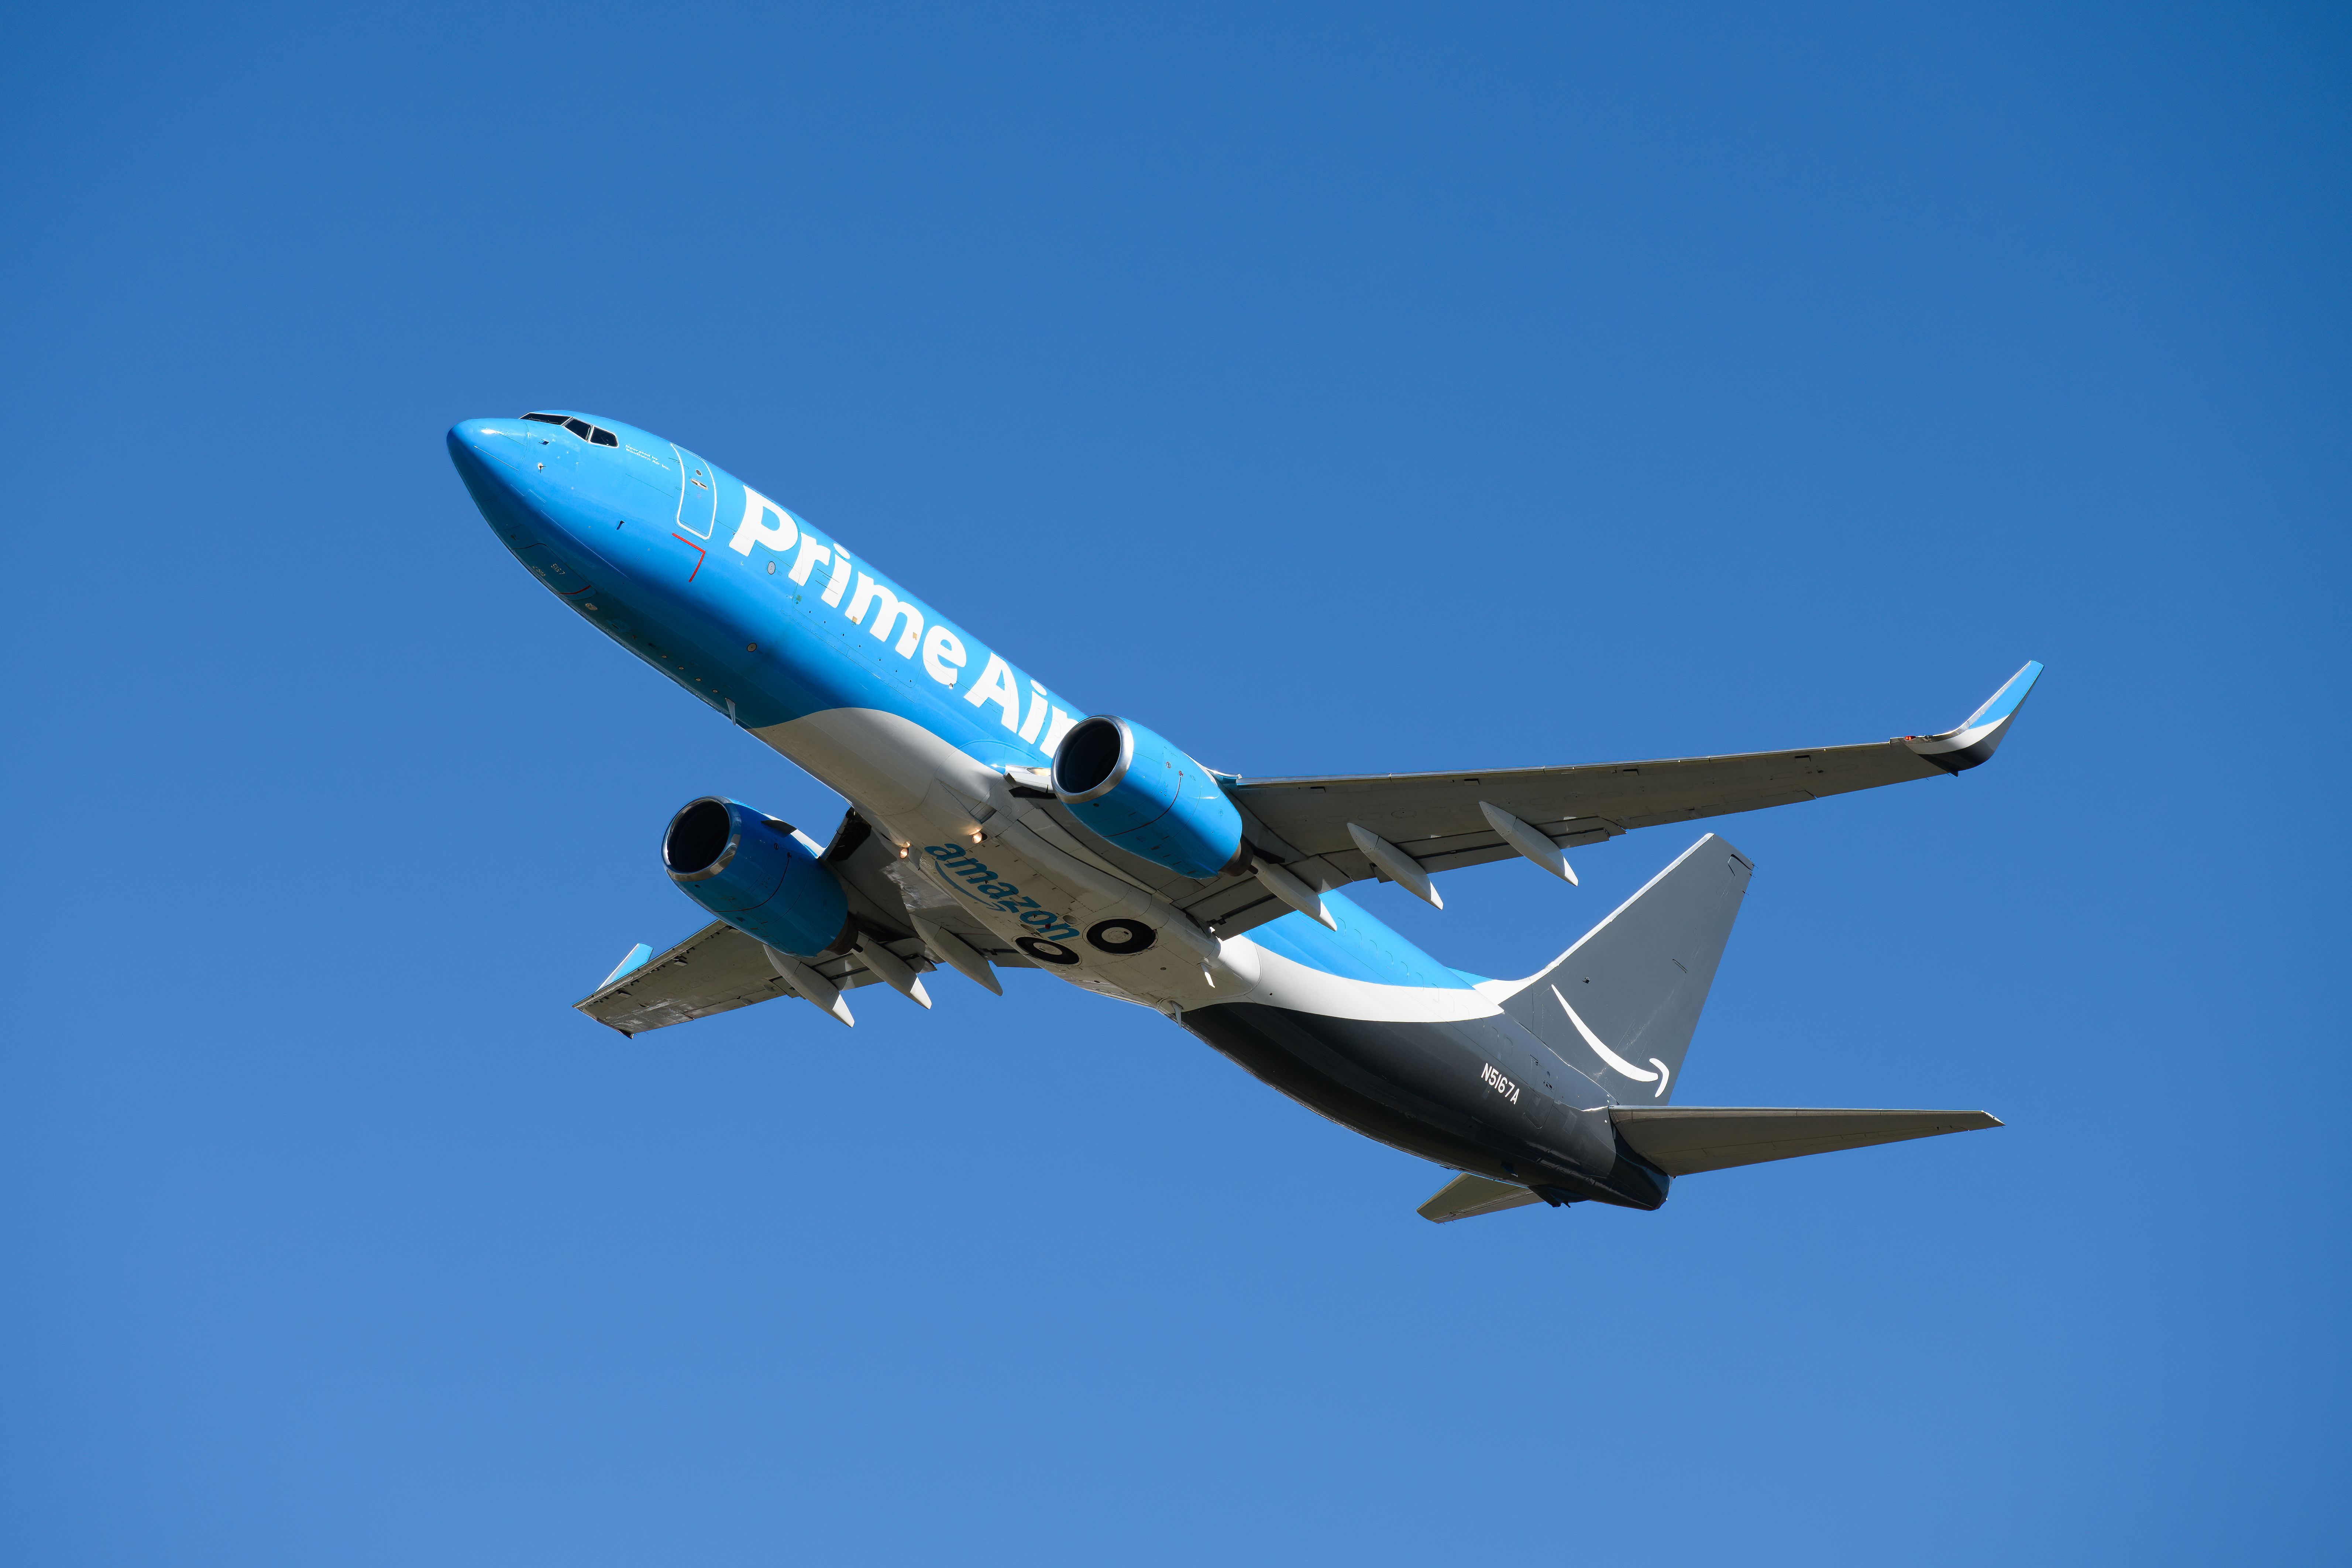 Amazon Prime Air Boeing 737 freighter